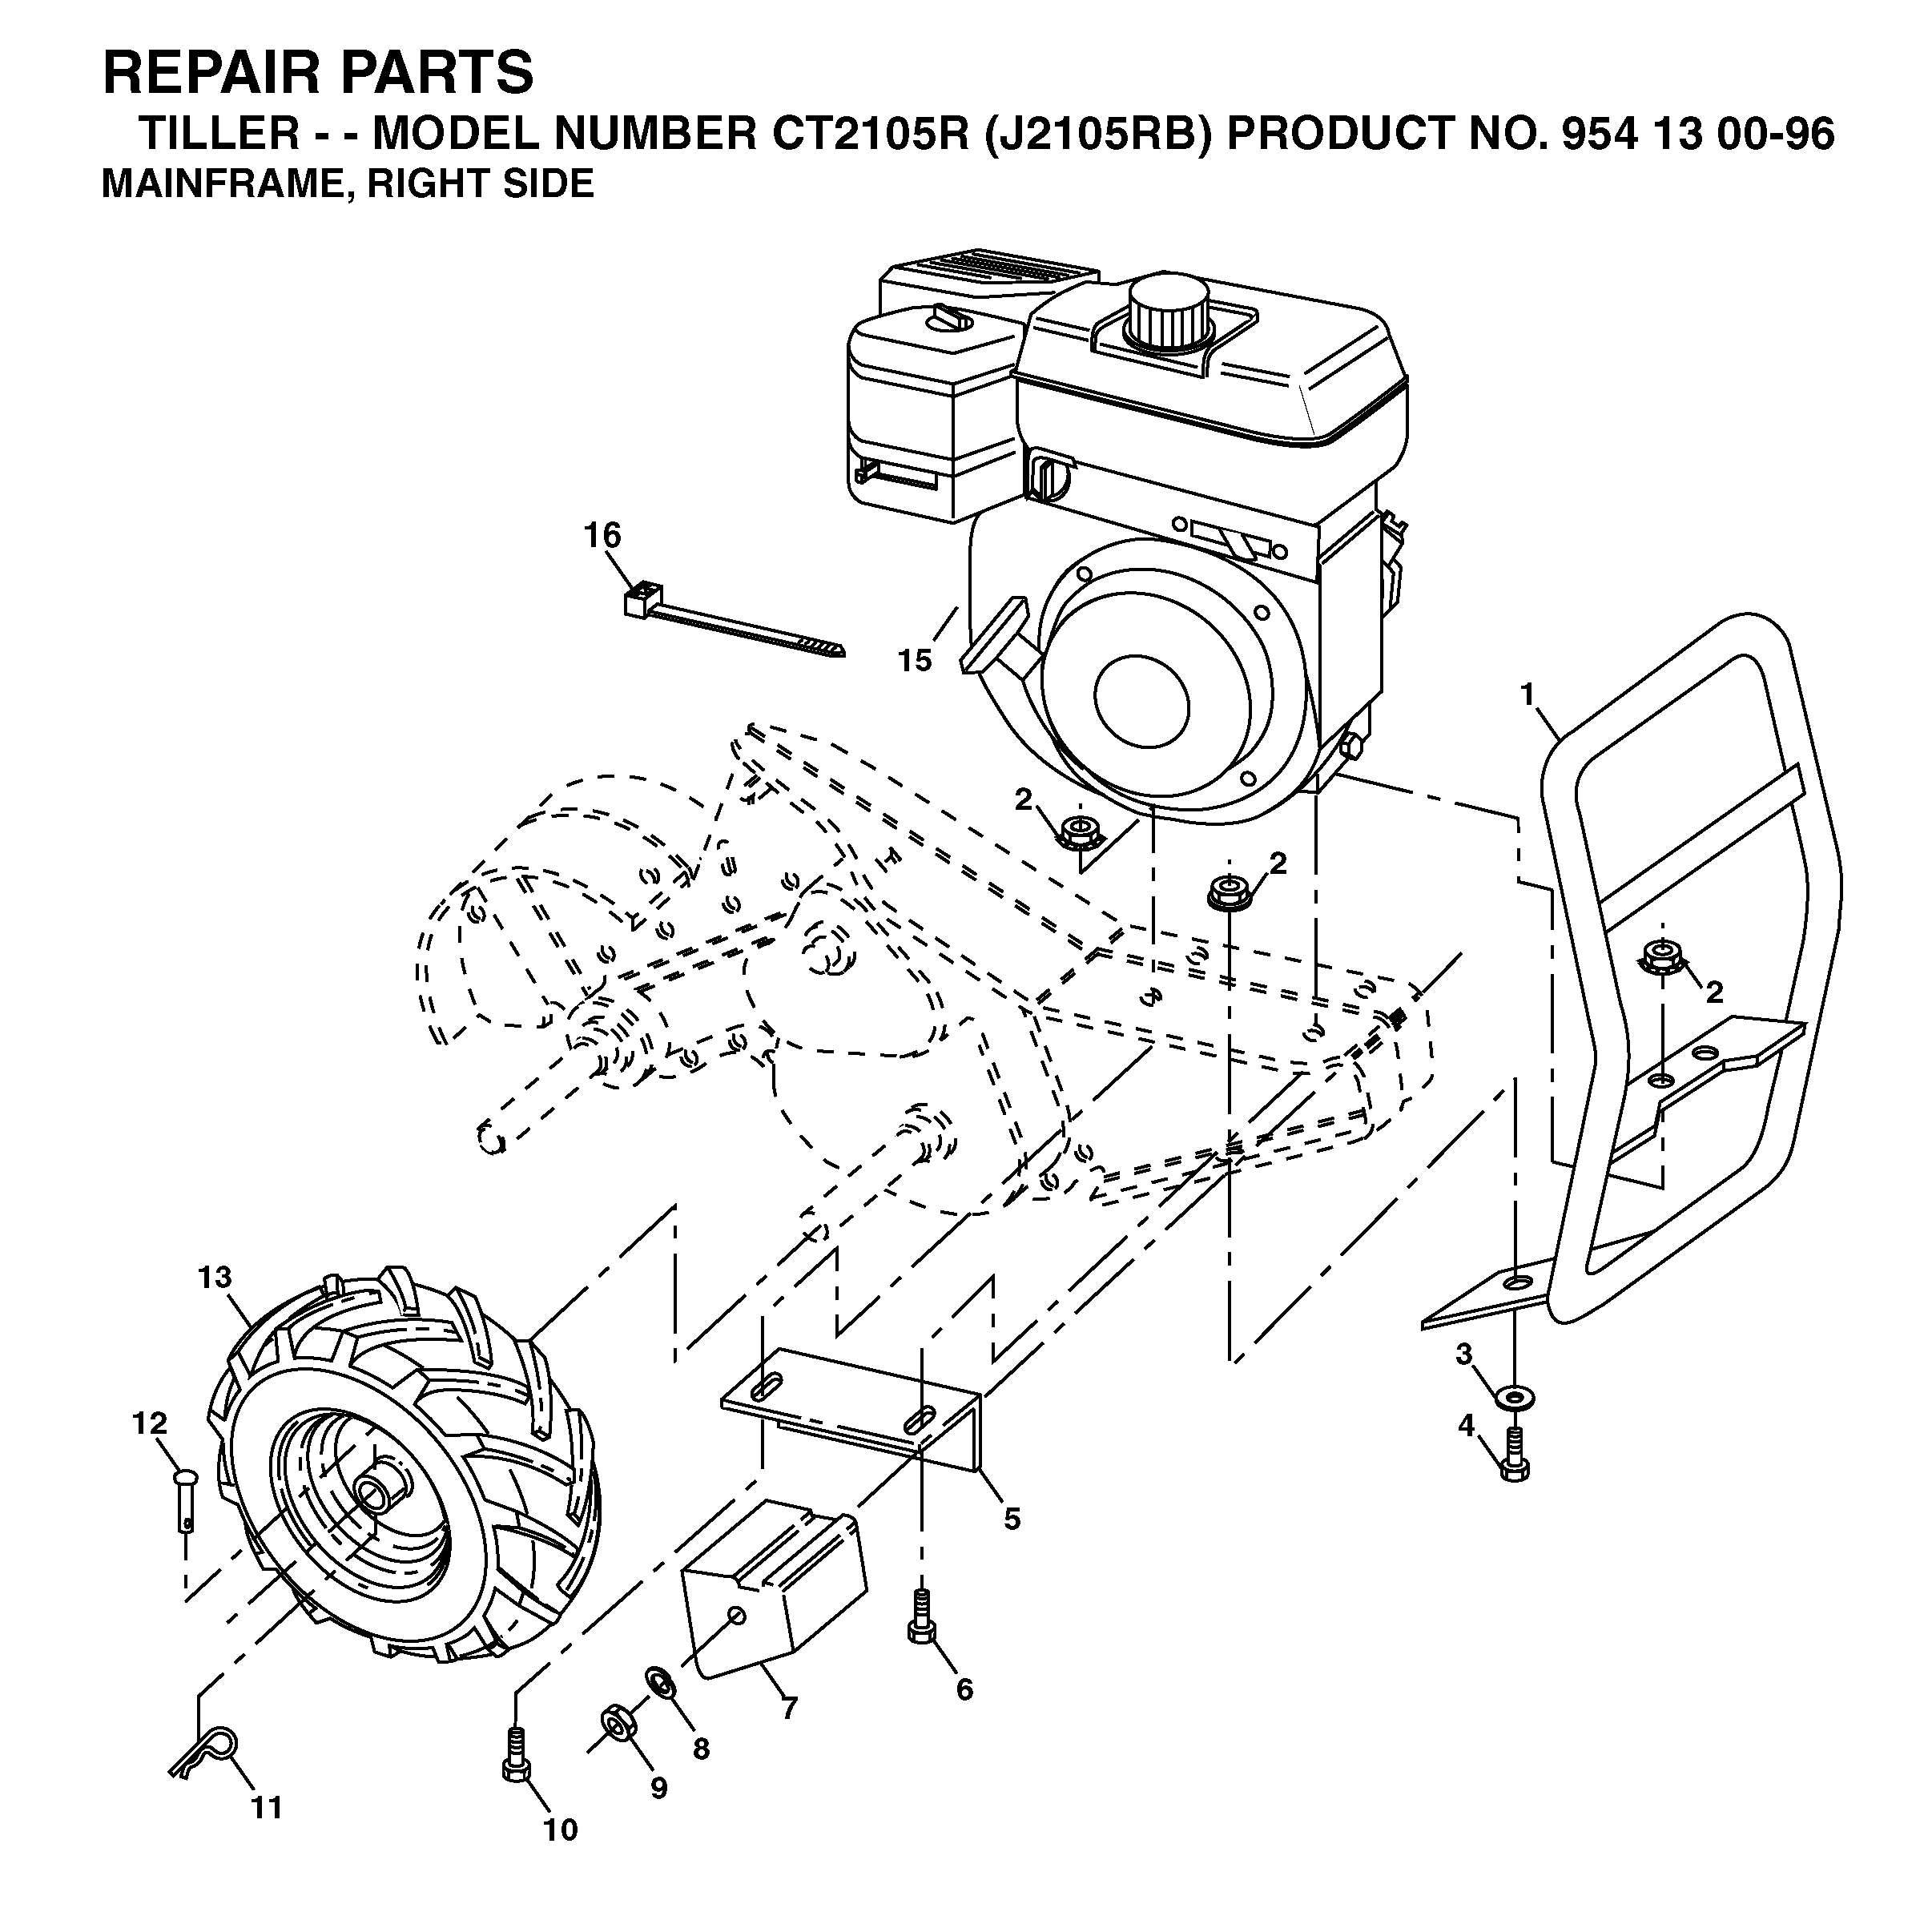 Main frame, right side 583879301, 596040501, 734116301, 596030501, 532102332, 874760528, 532102173, 596238701, 873220600, 874760524, 532004497, 532126875, 532005015, 532124366, 532065139, 532124756